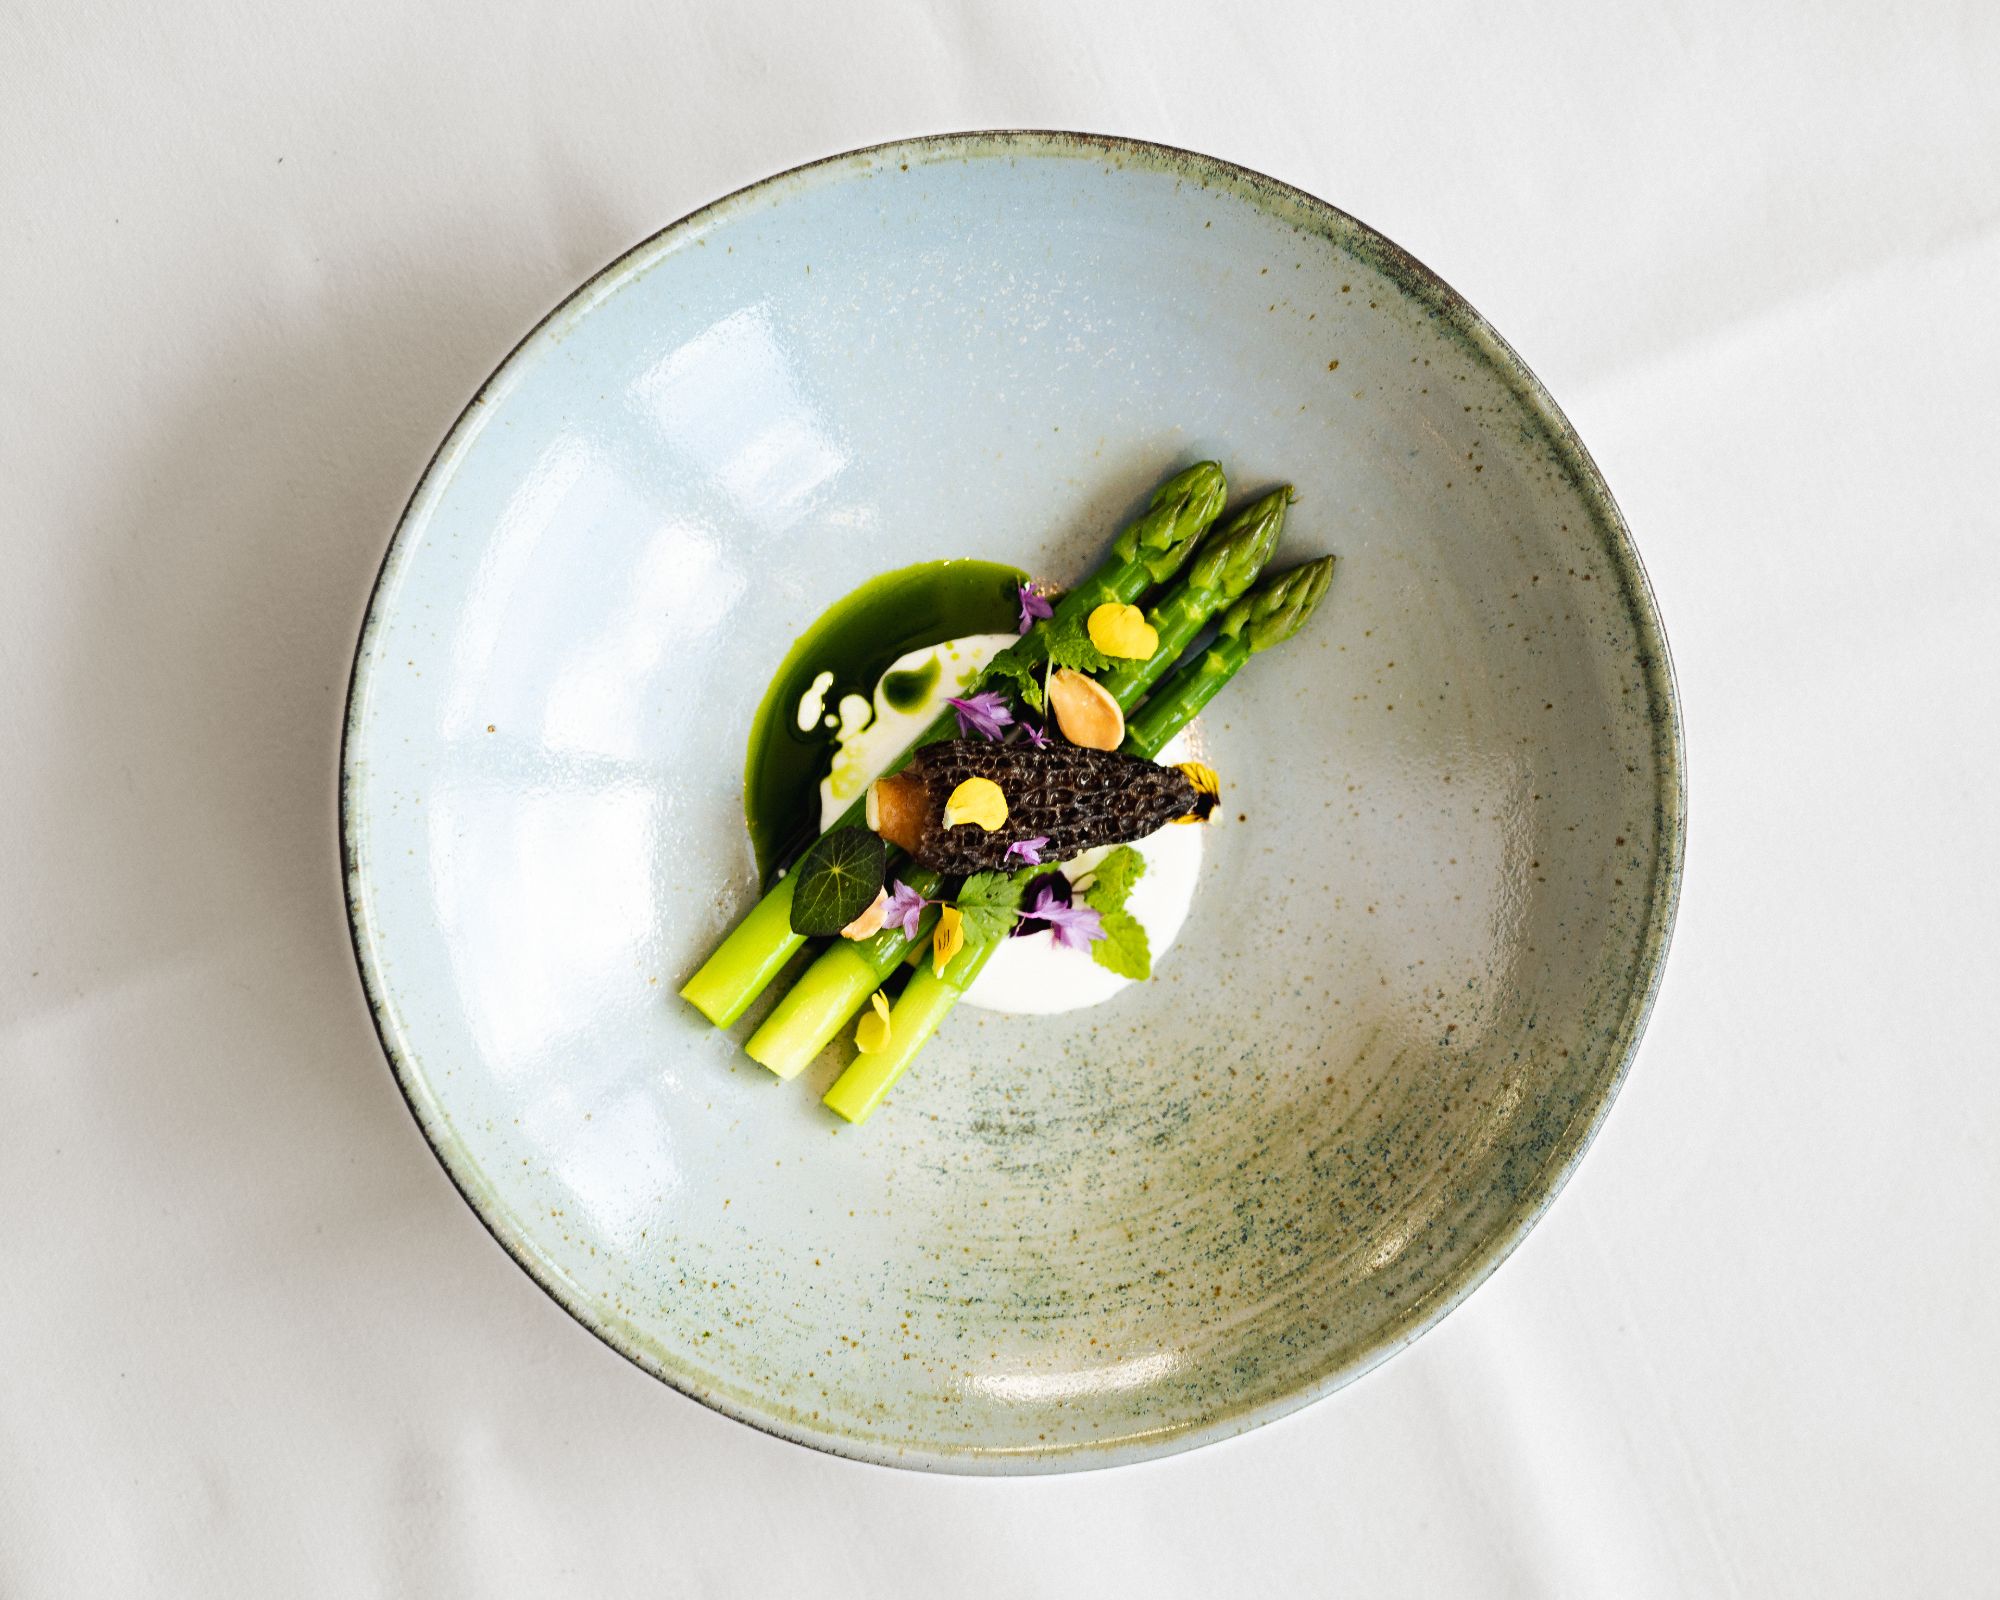 Asparagus, morels and nettles, one of the courses of the Galvin at Windows x Turnips vegan menu